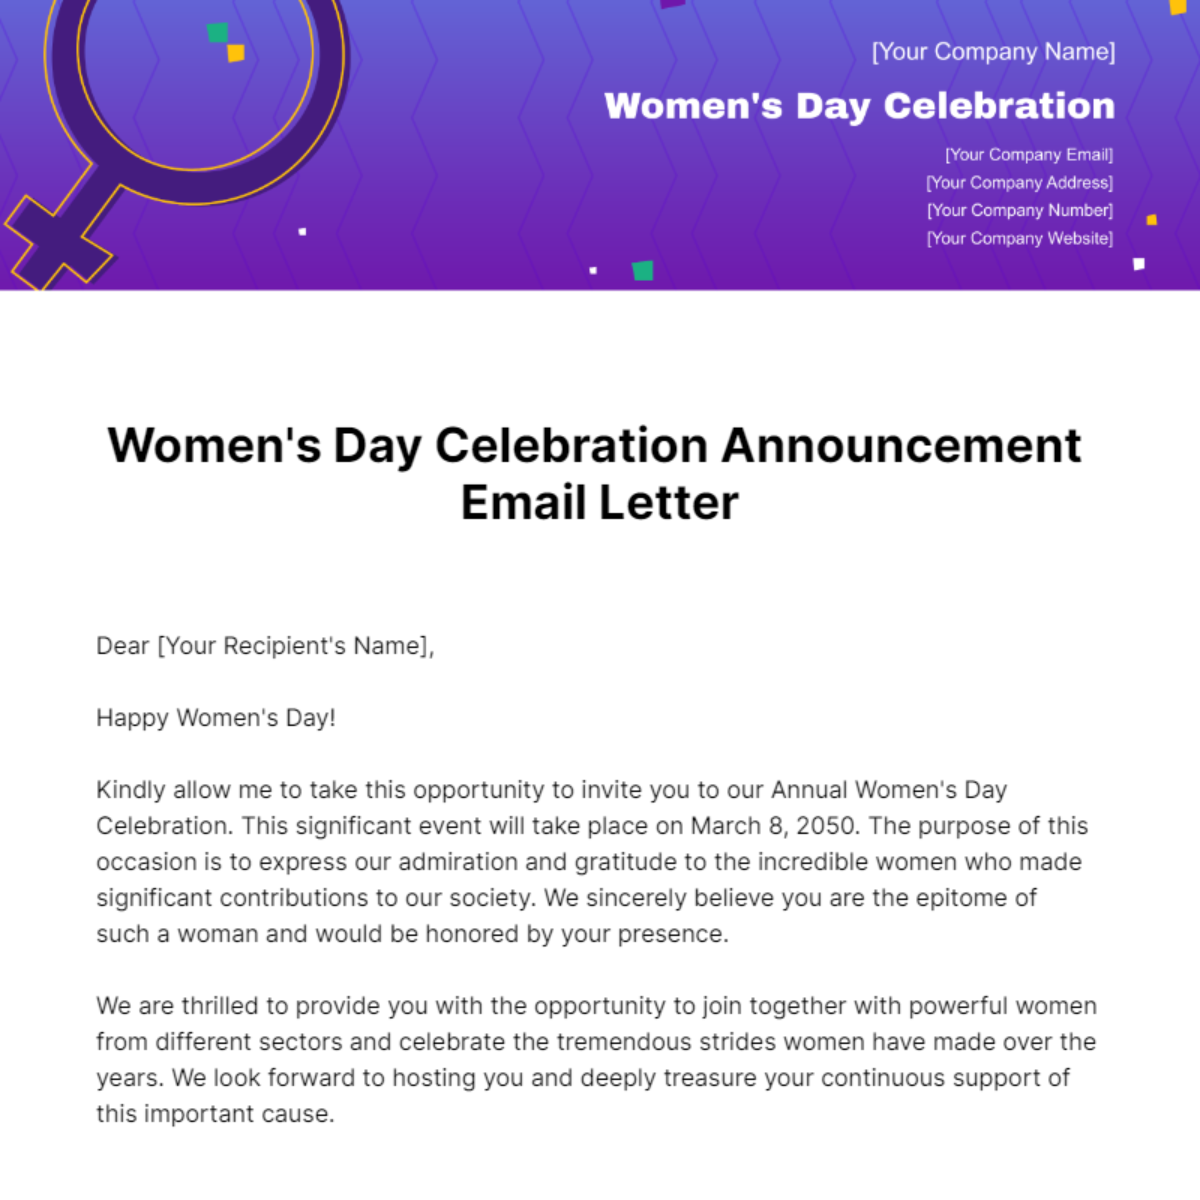 Women's Day Celebration Announcement Email Letter Template